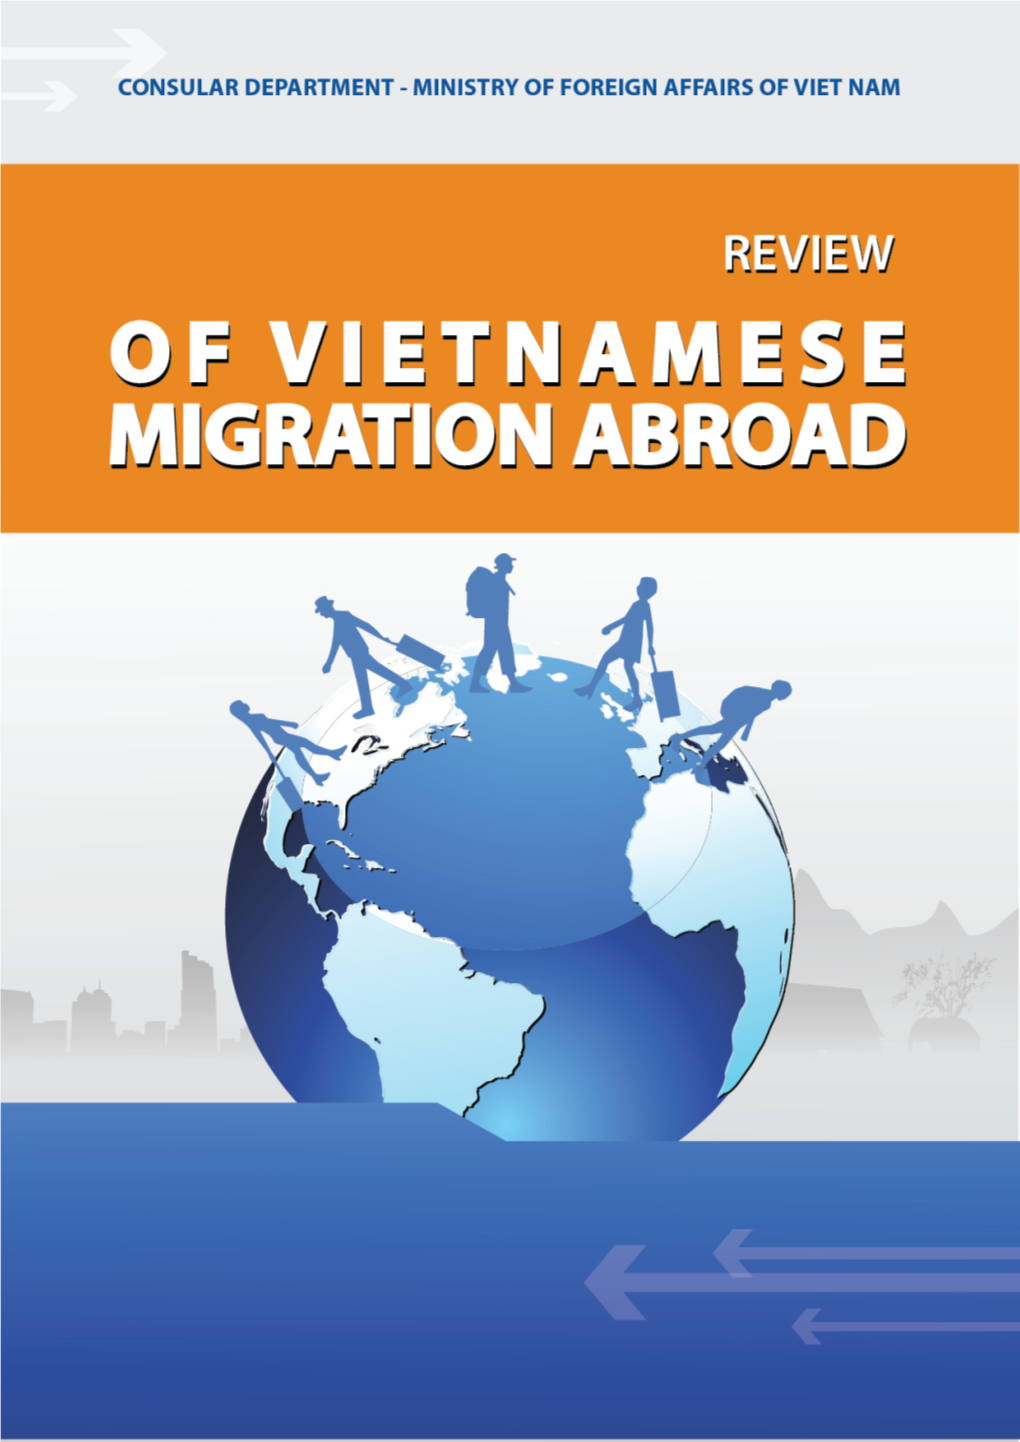 Review of Vietnamese Migration Abroad